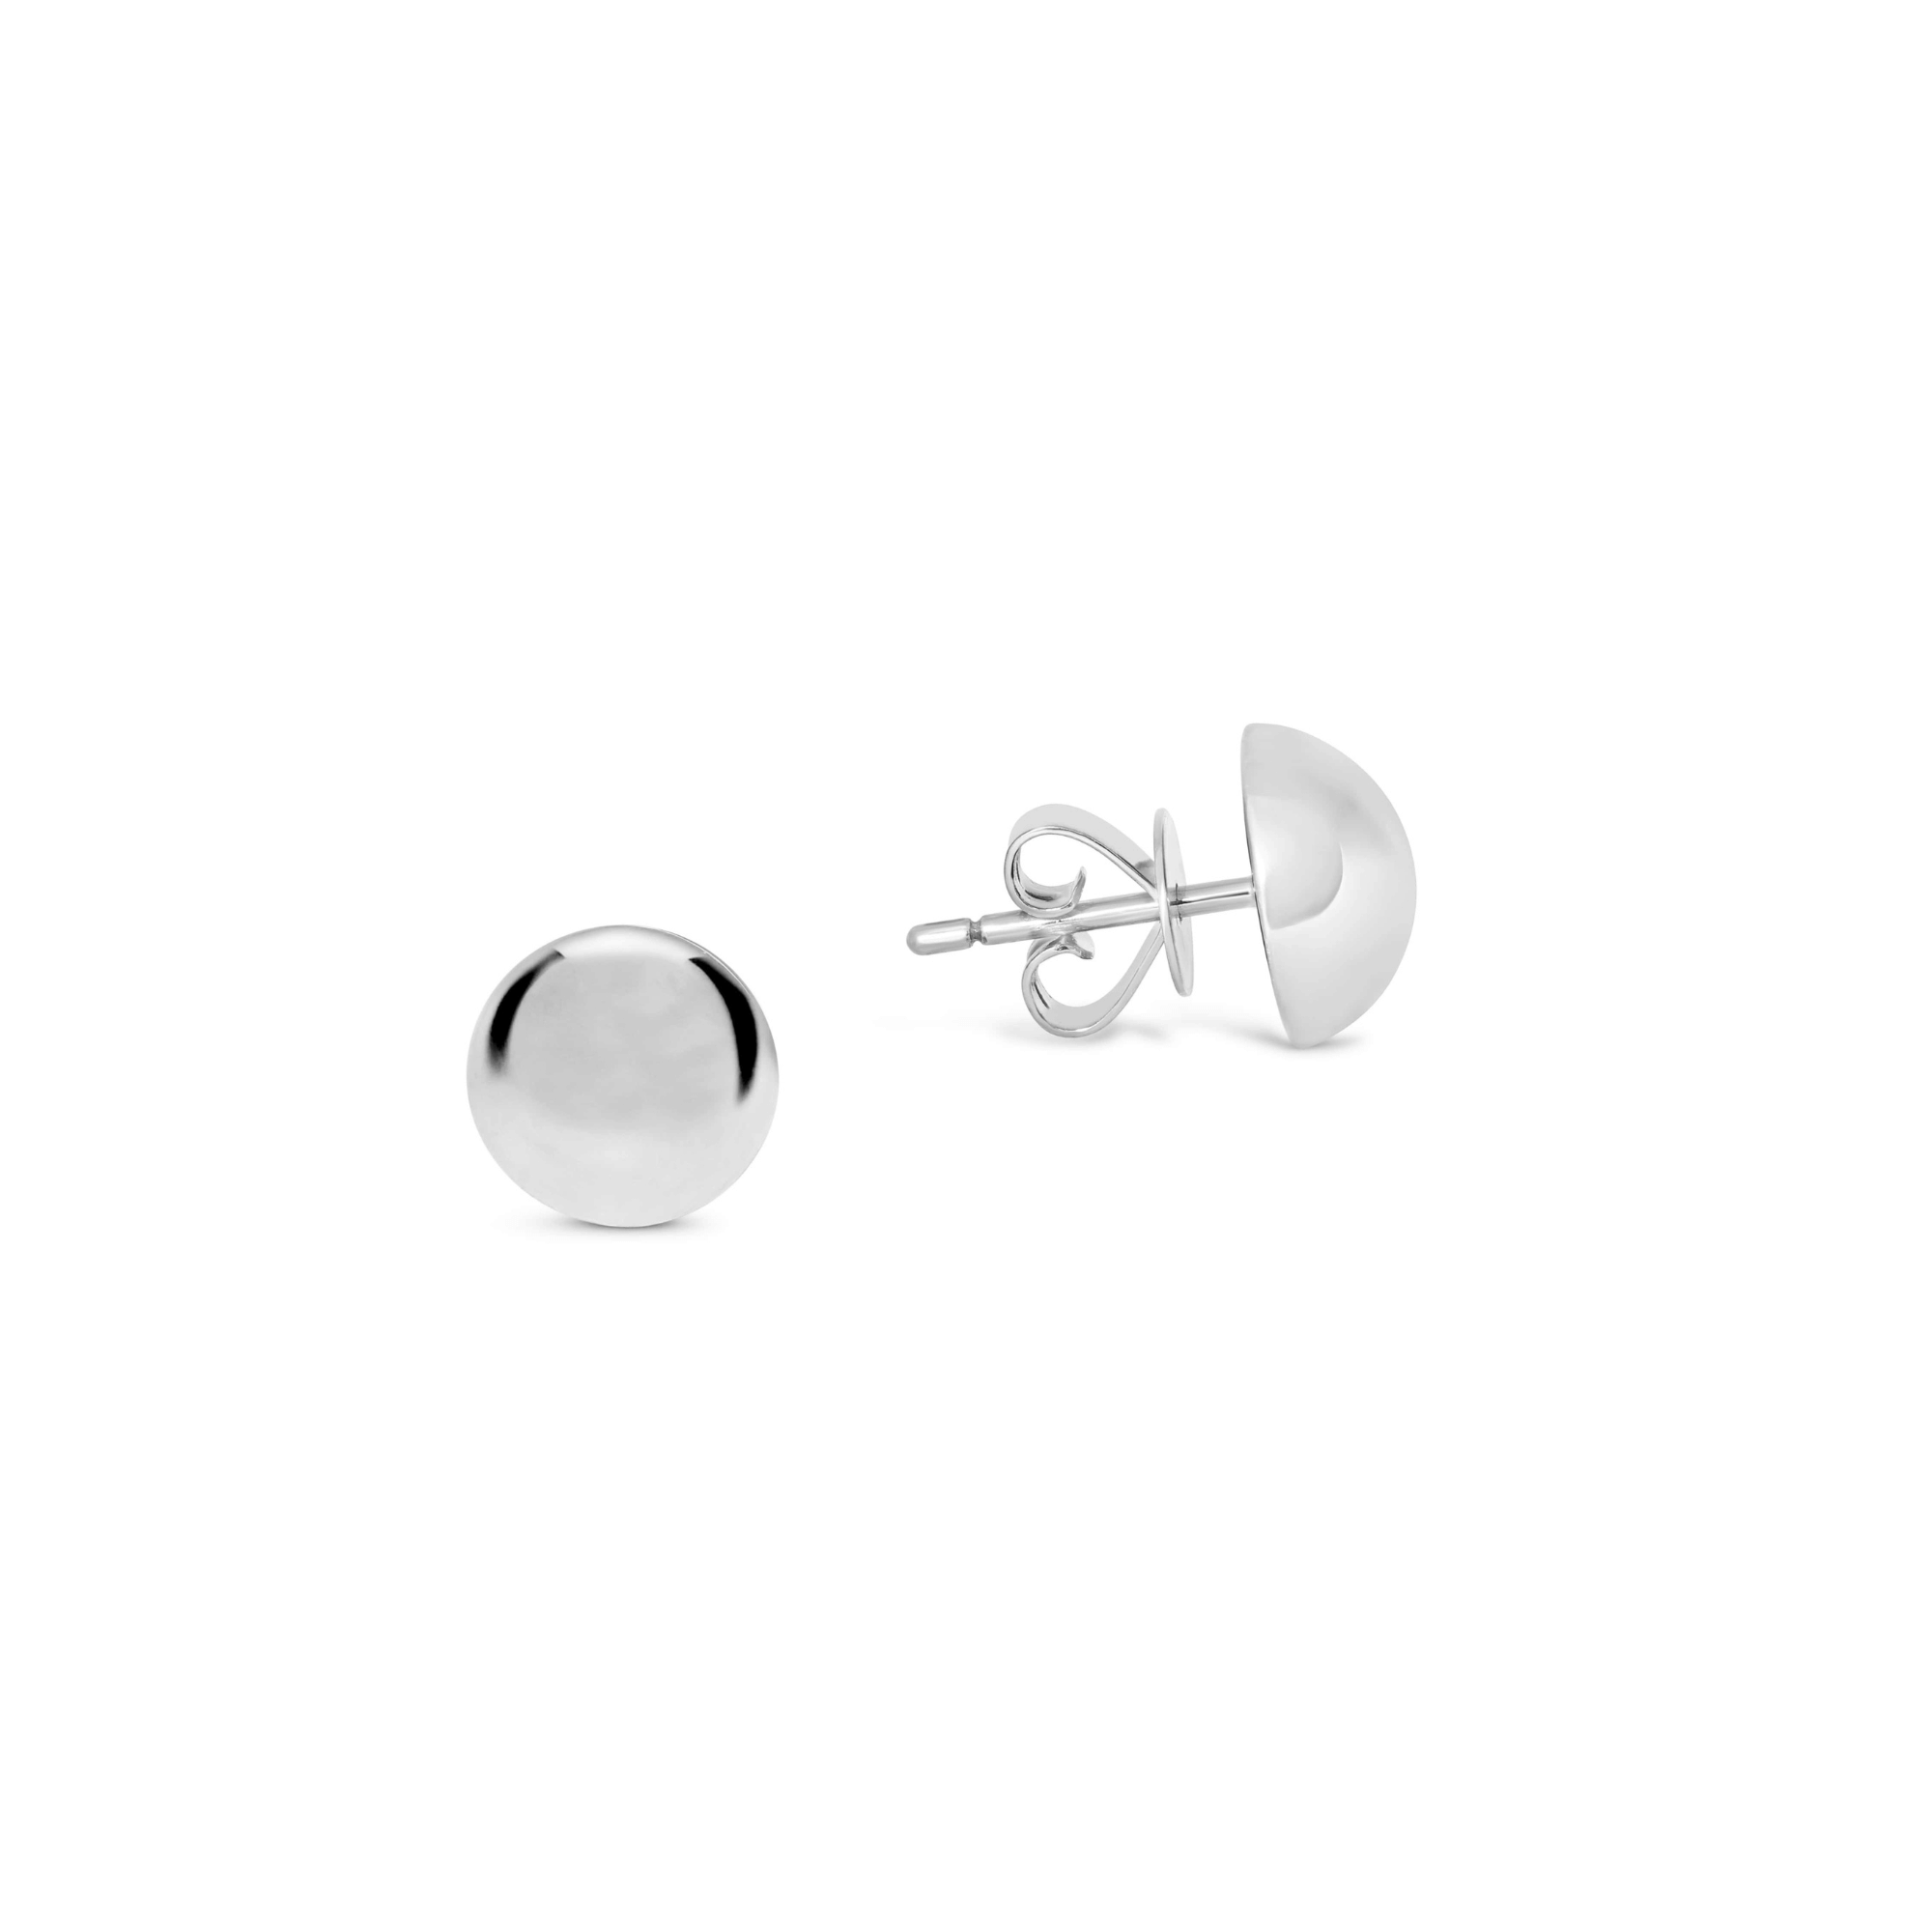 White Gold Dome Earrings